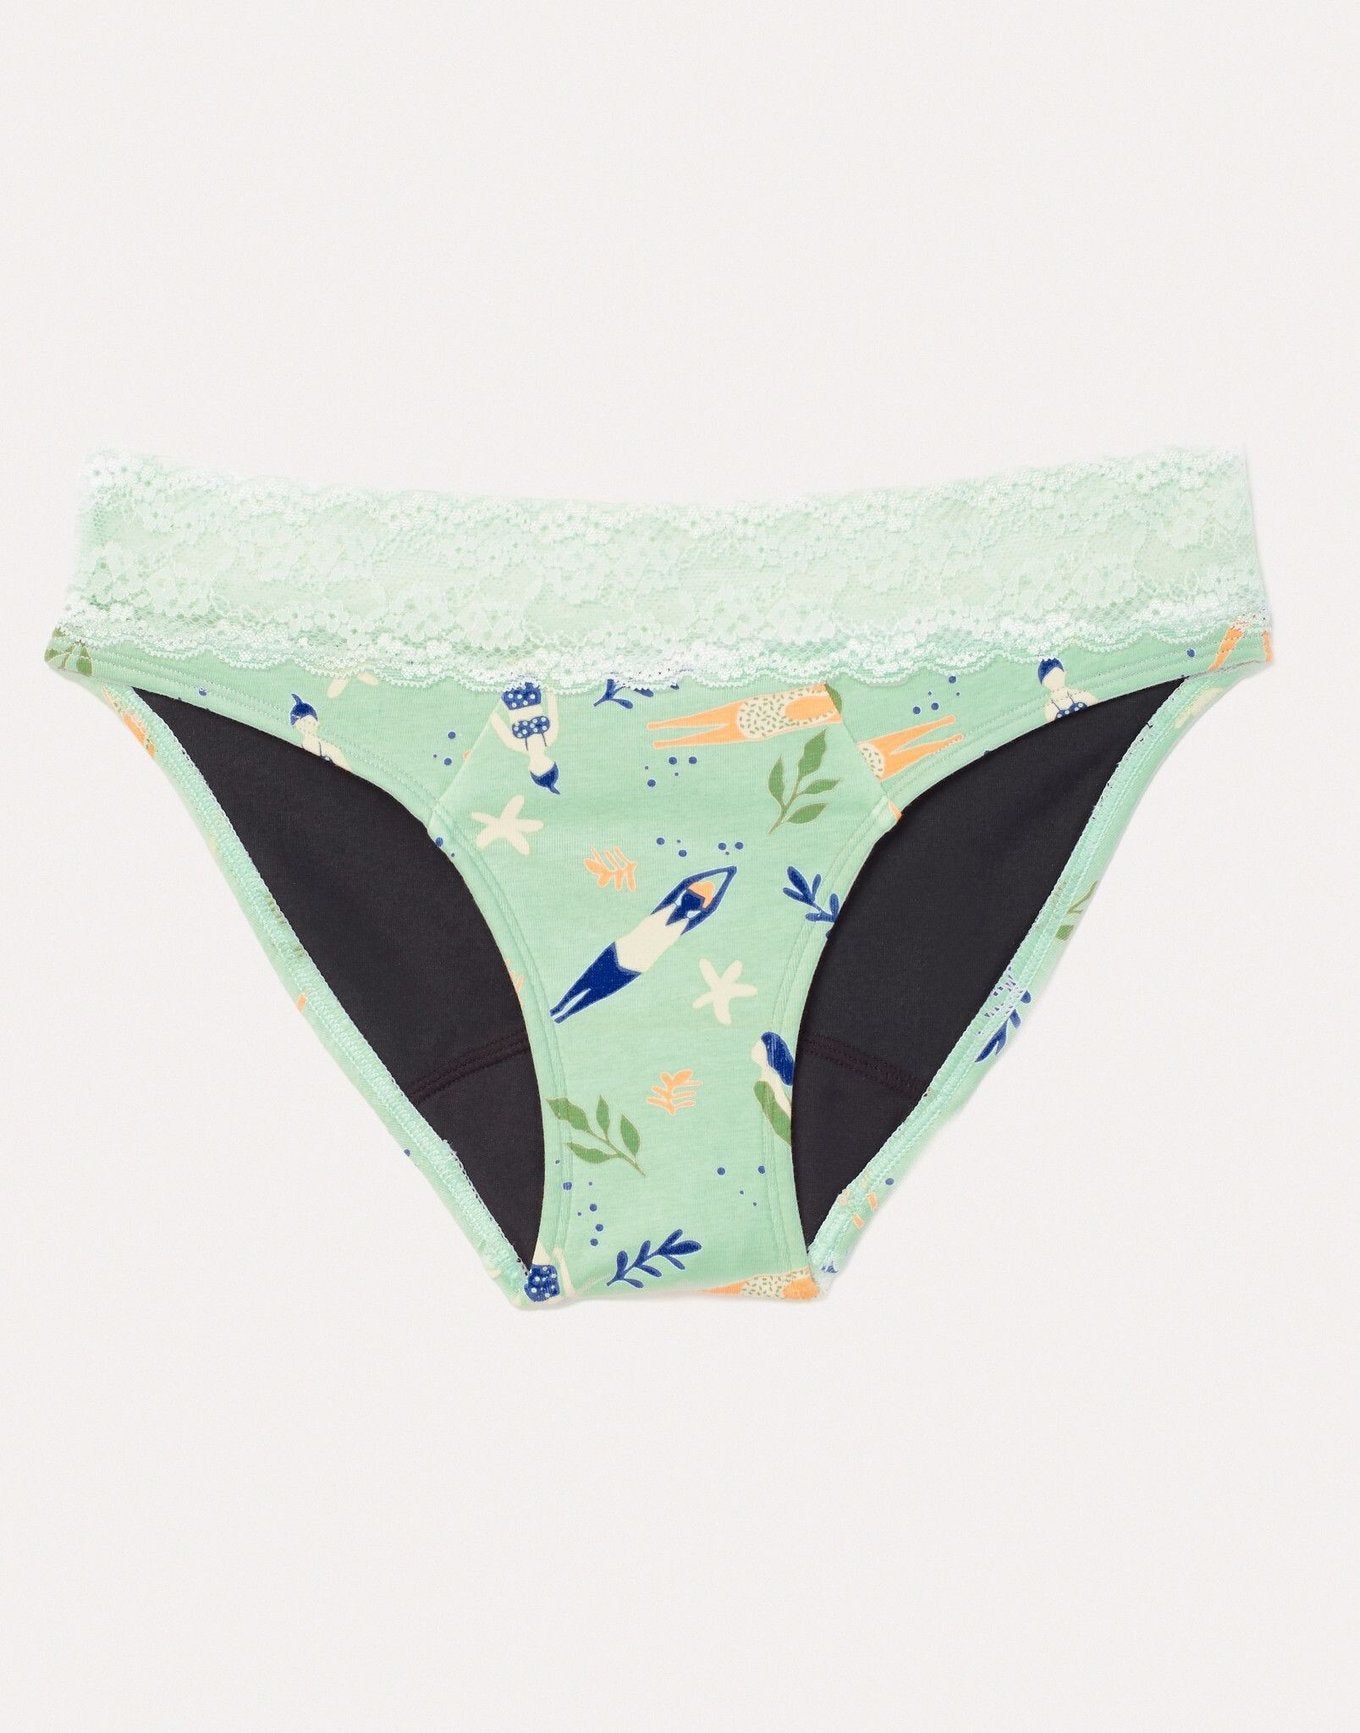 Joyja Alice period-proof panty in color Go With The Flow and shape bikini